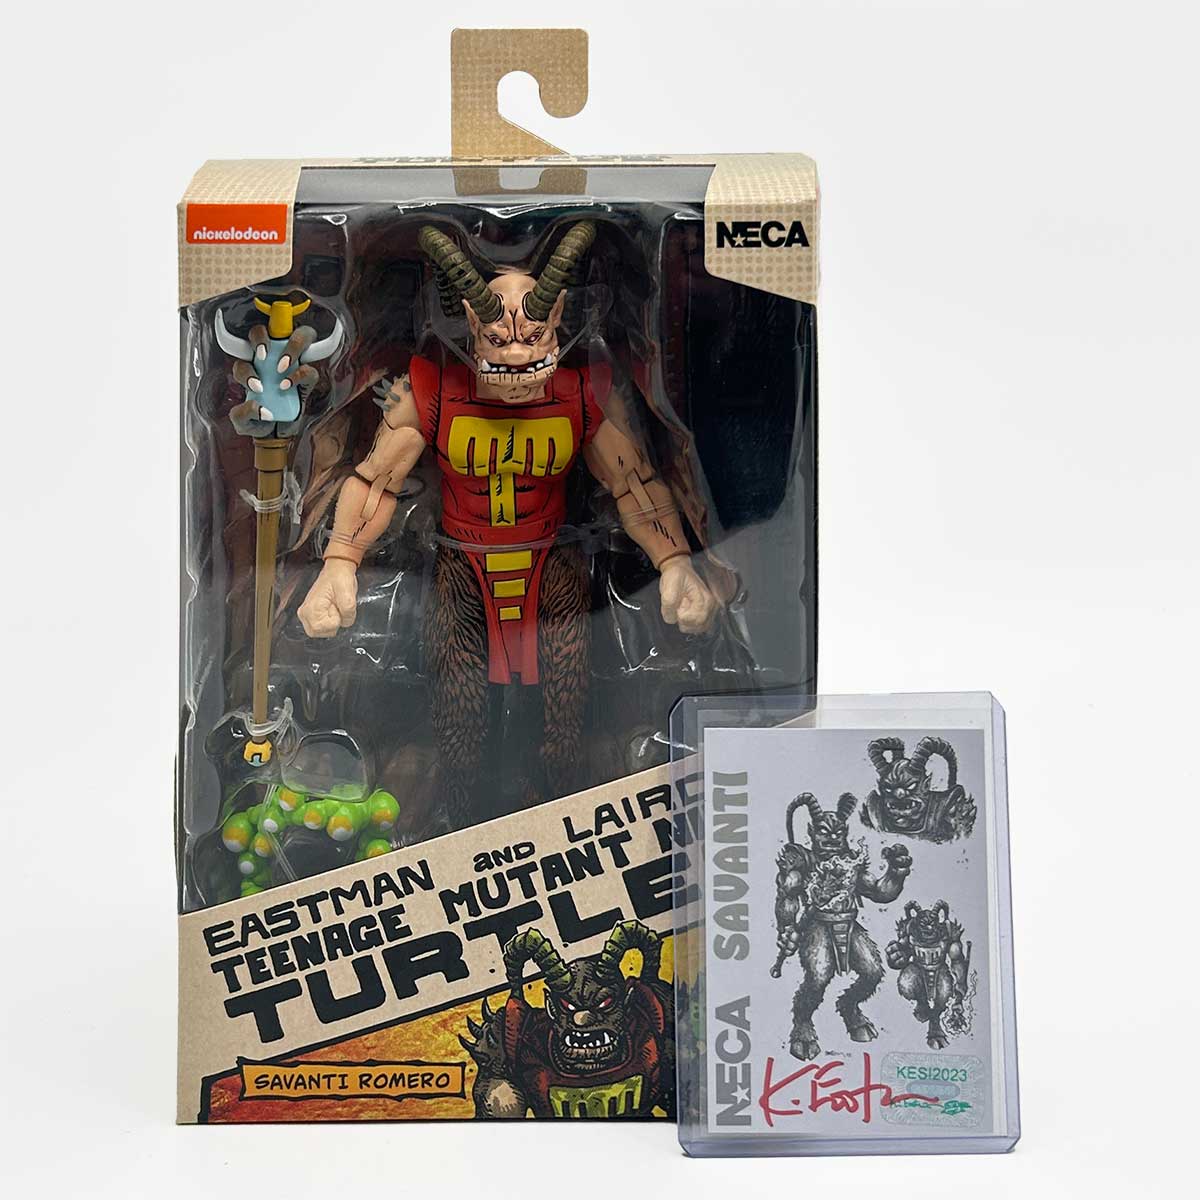 NECA Updates - New Mirage Comics Collectibles and a Cartoon Sale